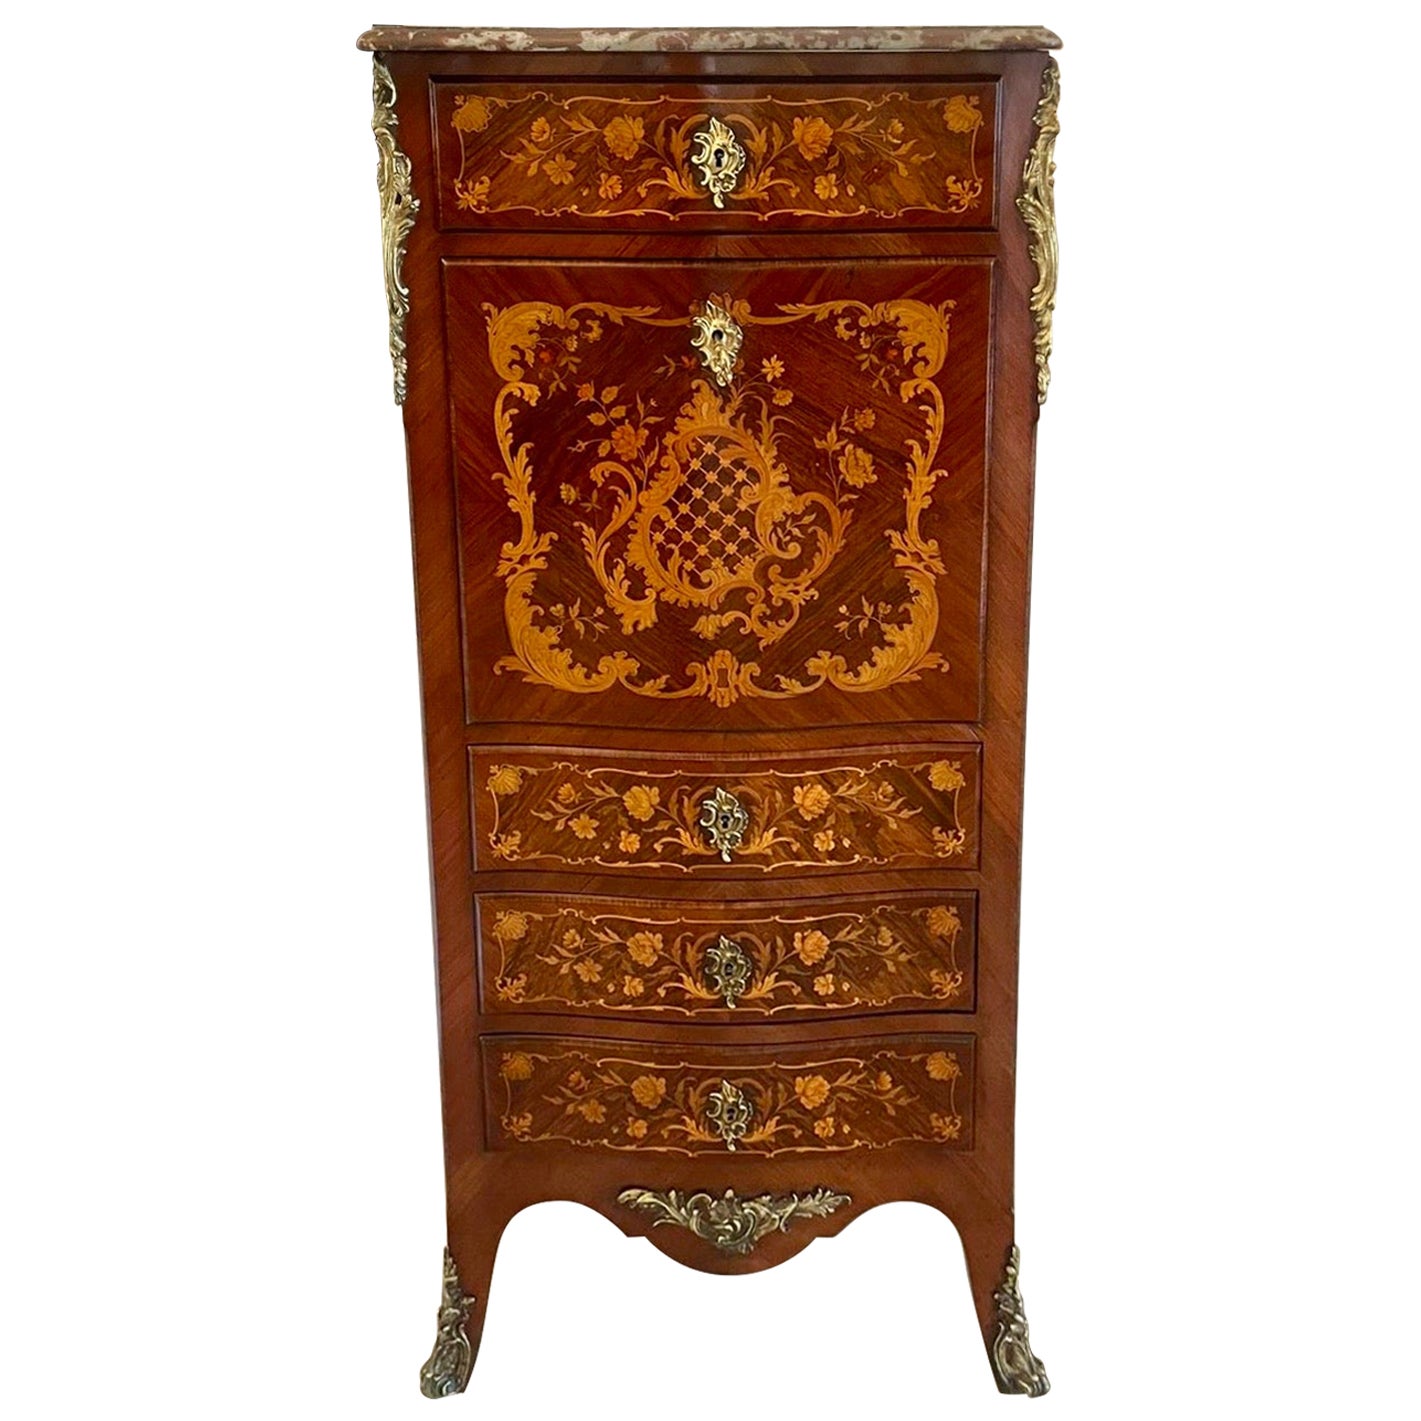 Antique French Quality Kingwood  Inlaid Marble Top Bombe Shaped Secretaire Chest For Sale